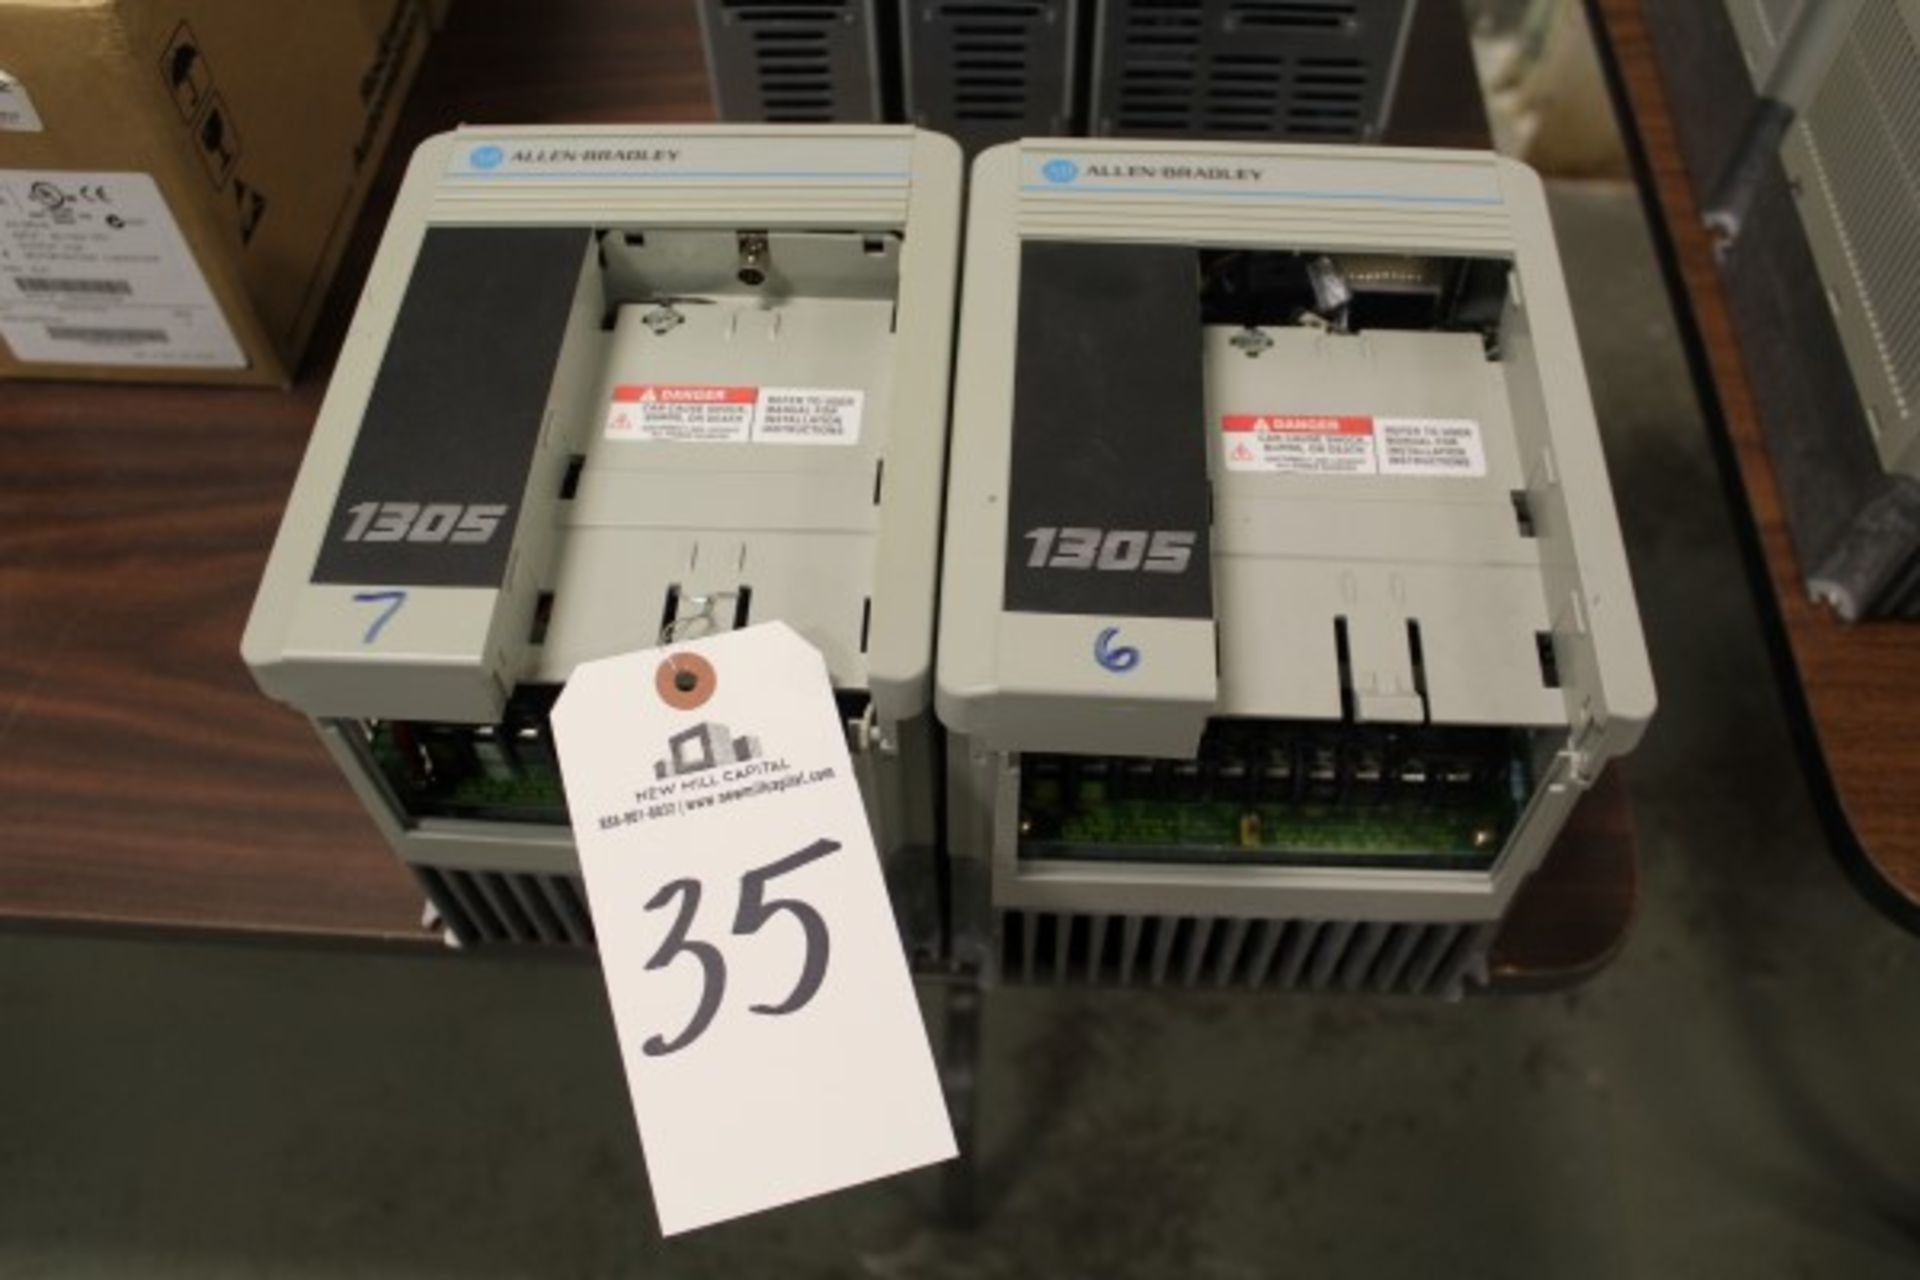 Lot of (2) Allen Bradley 1305 AC Drives | Location: Cookie Line | Rigging Price: Buyer May Hand